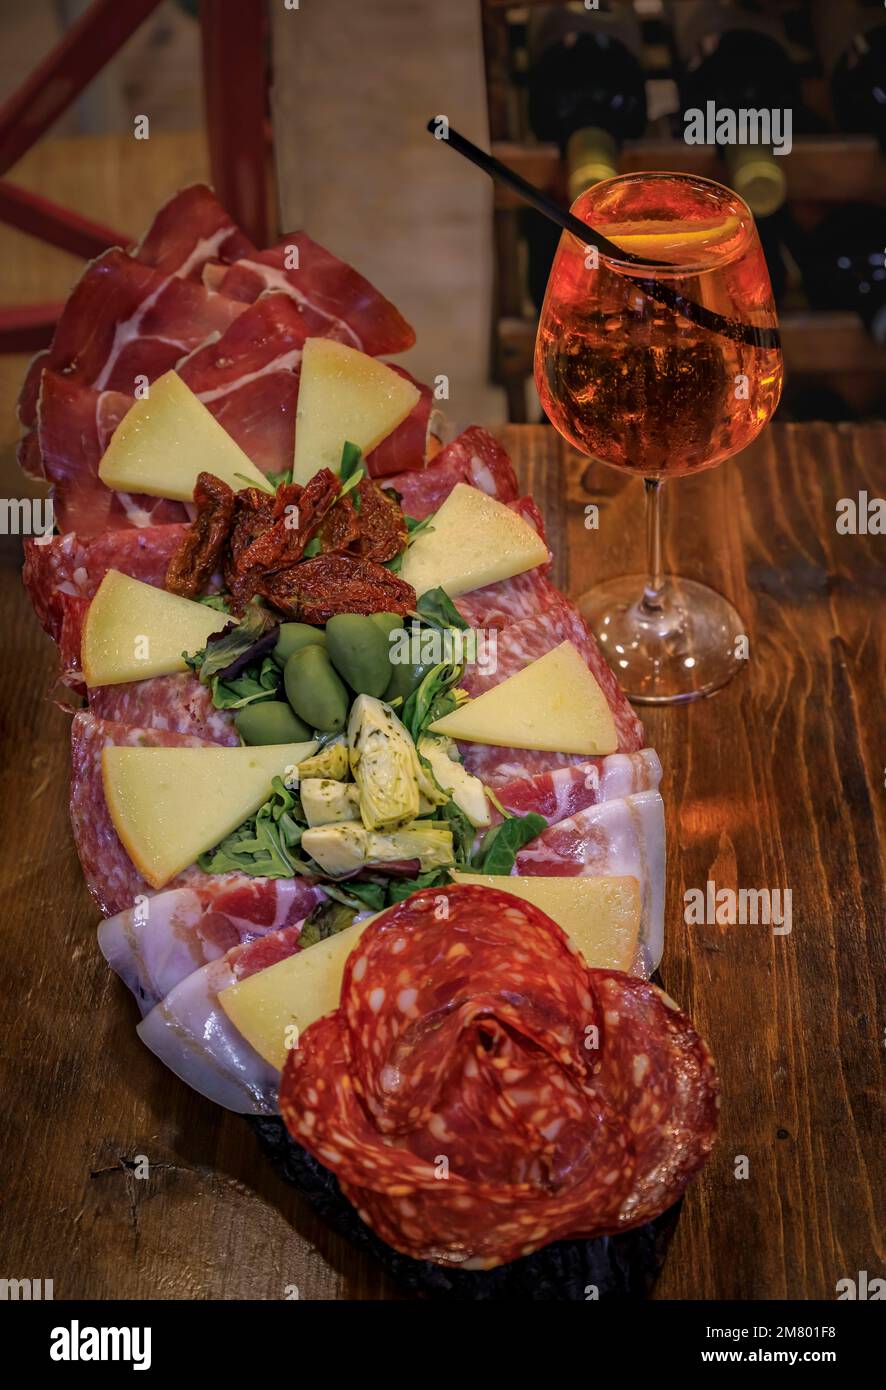 Italian antipasto platter with prosciutto, salami, cheese, olives served with a glass of aperol spritz cocktail at a restaurant in Florence, Italy Stock Photo